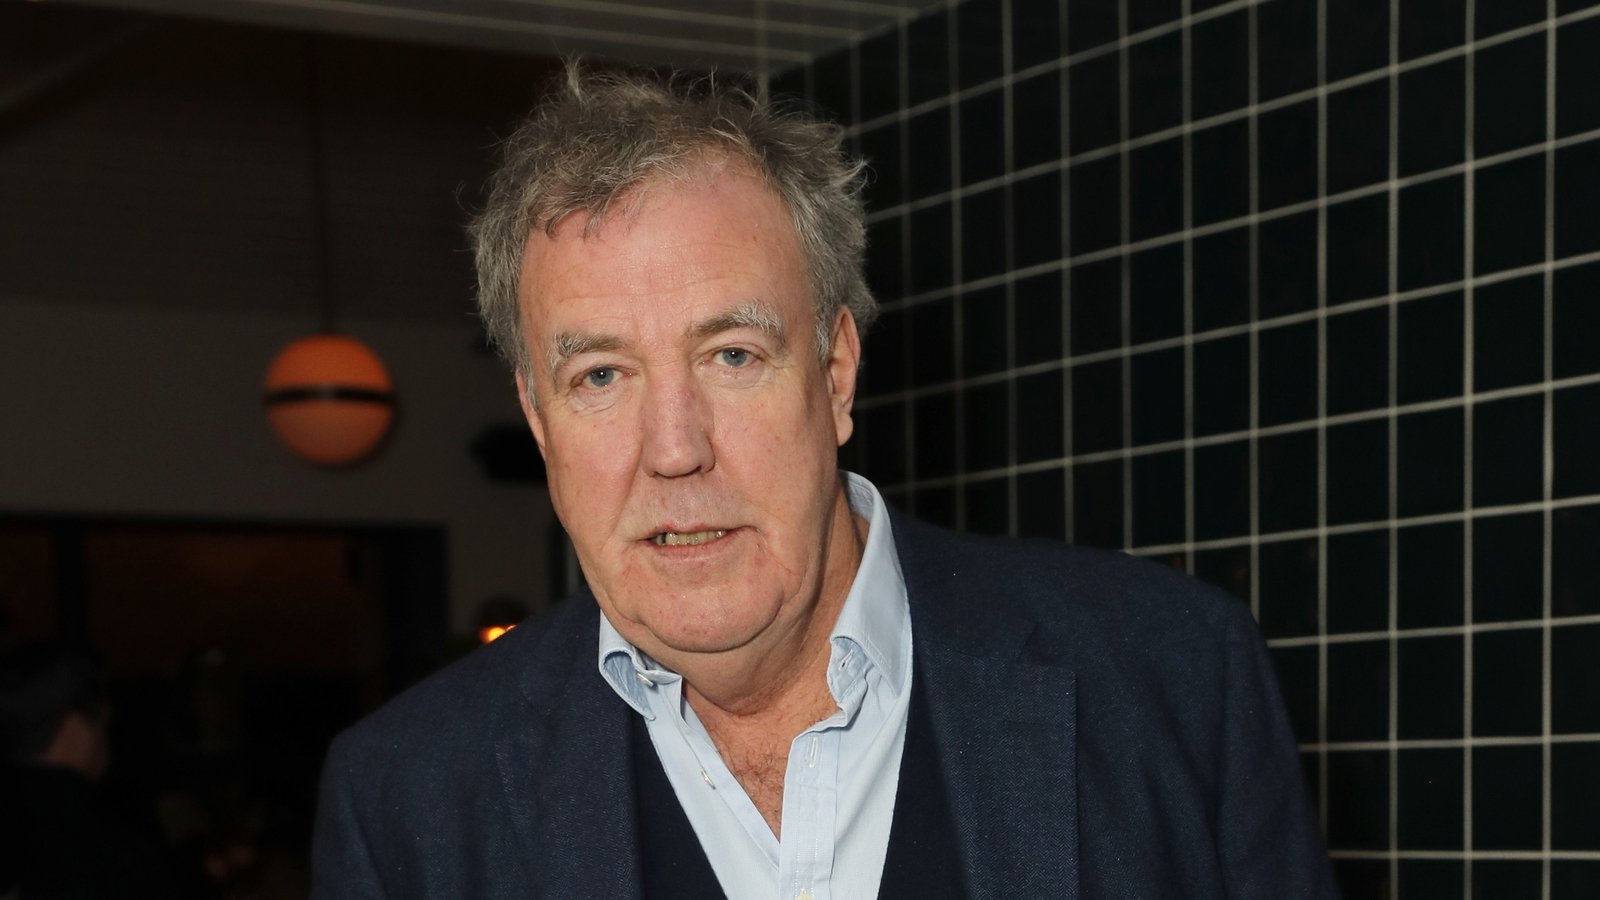 Itv Confirms Jeremy Clarkson Has Not Been Cancelled